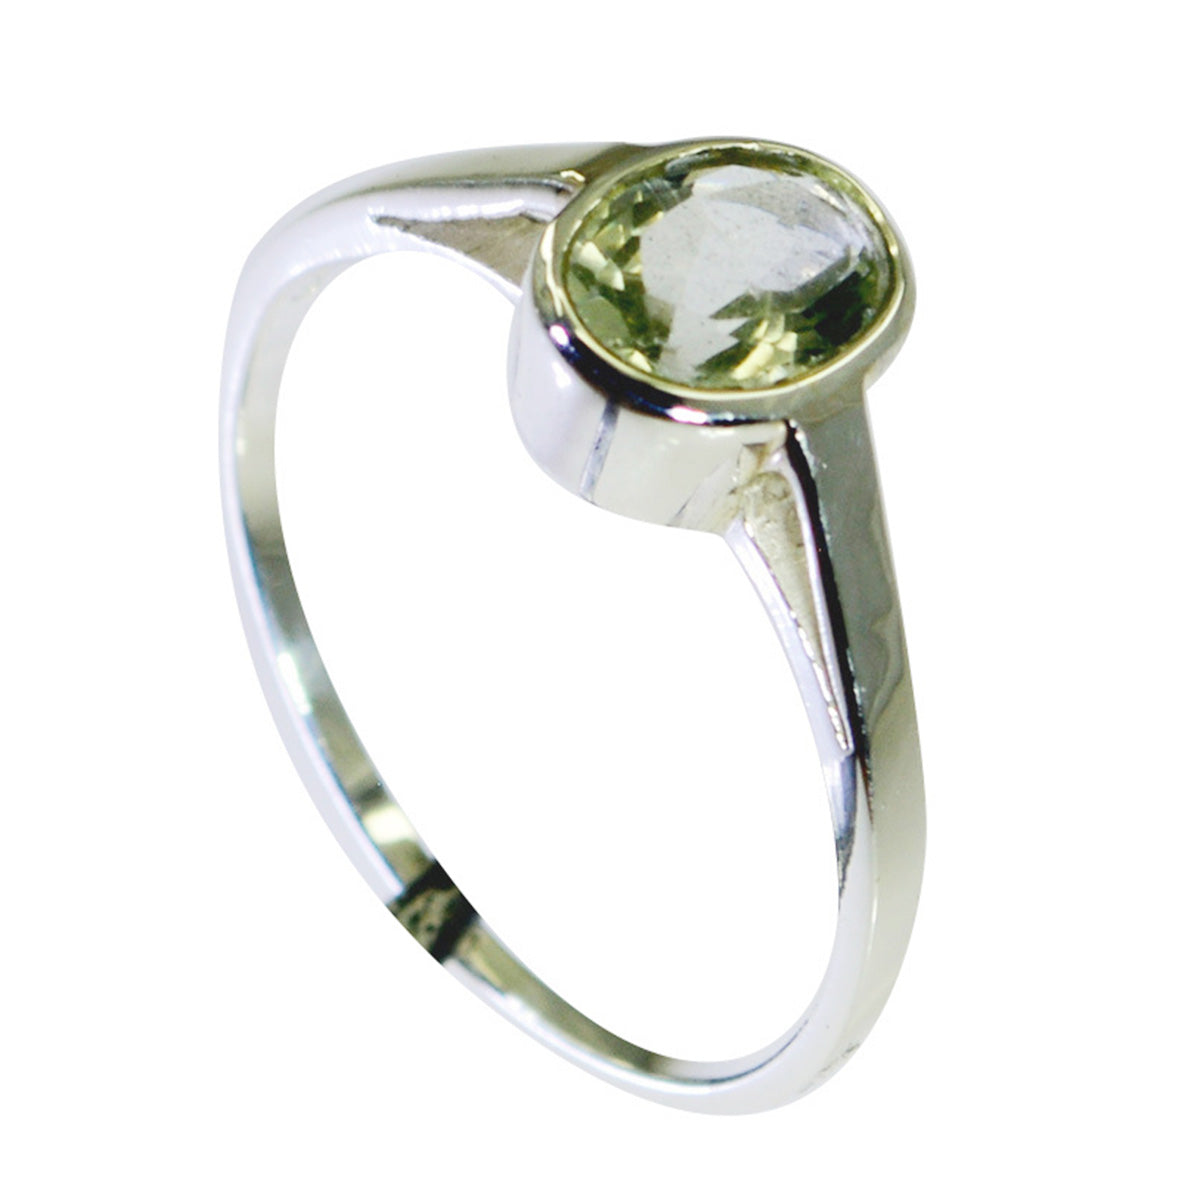 Lovesome Stone Green Amethyst Sterling Silver Ring Halloween Gift